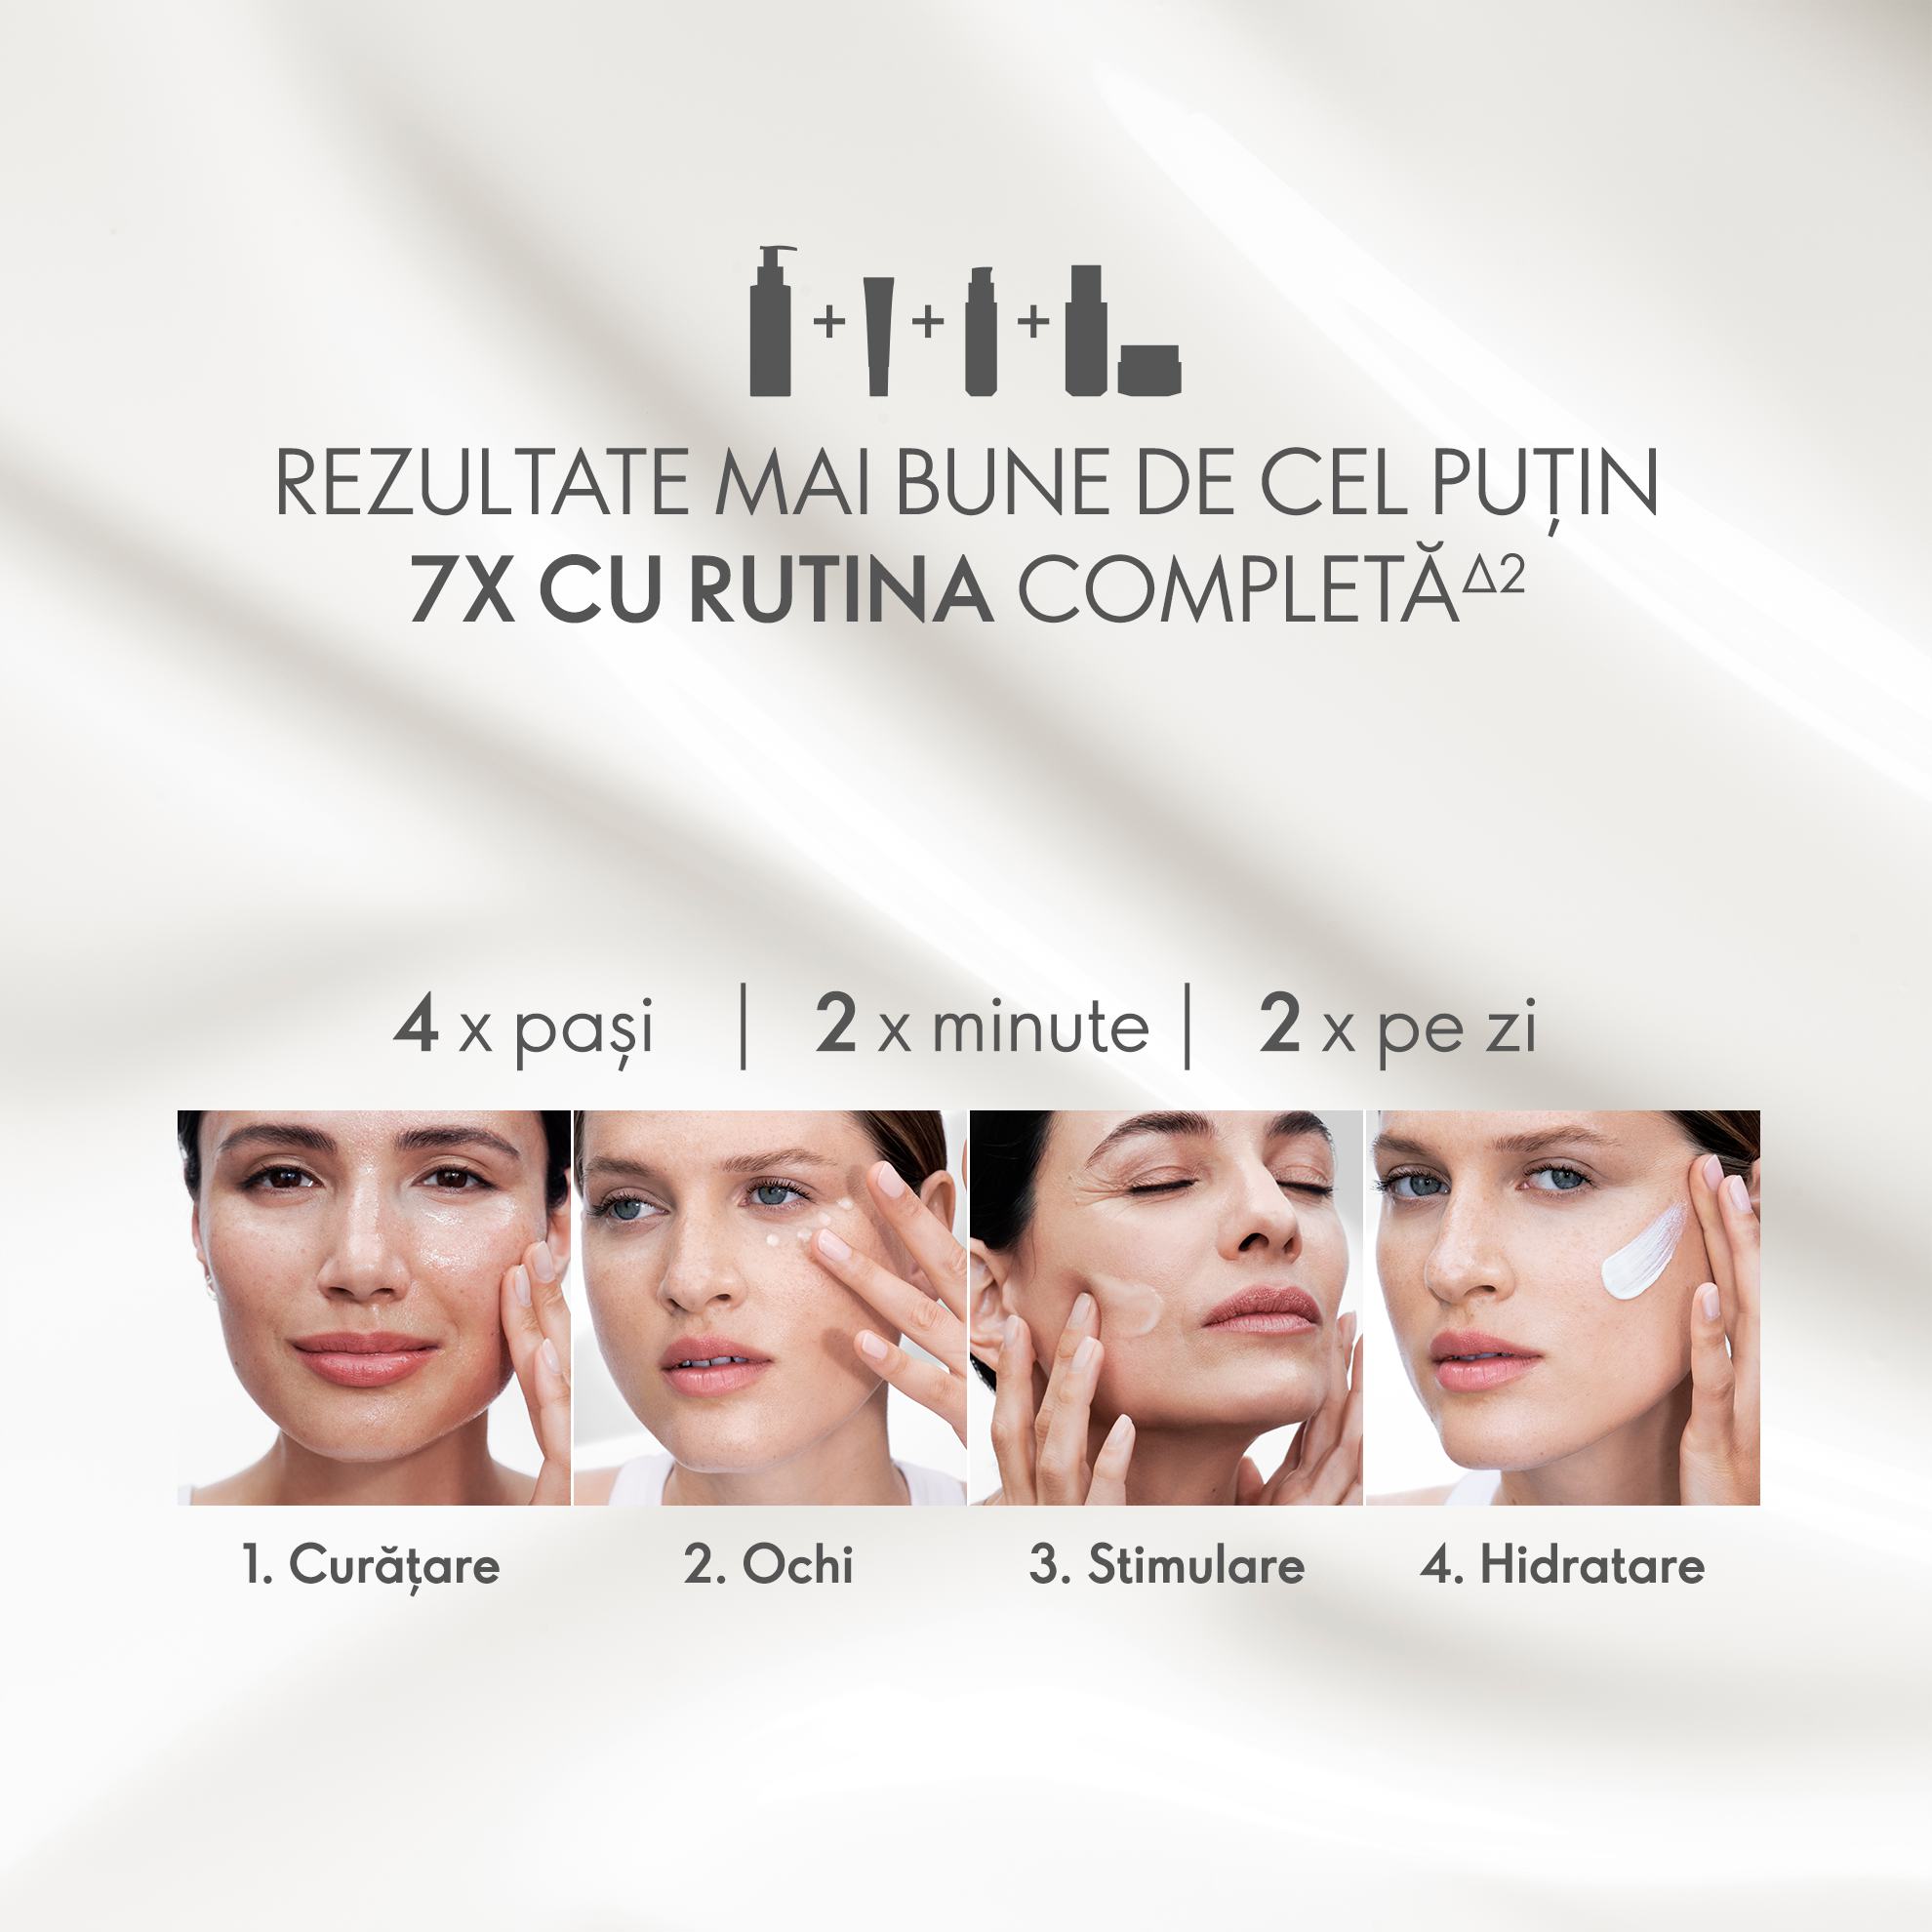 https://media-cdn.oriflame.com/productImage?externalMediaId=product-management-media%2fProducts%2f45595%2fMD%2f45595_12.png&id=17749866&version=1